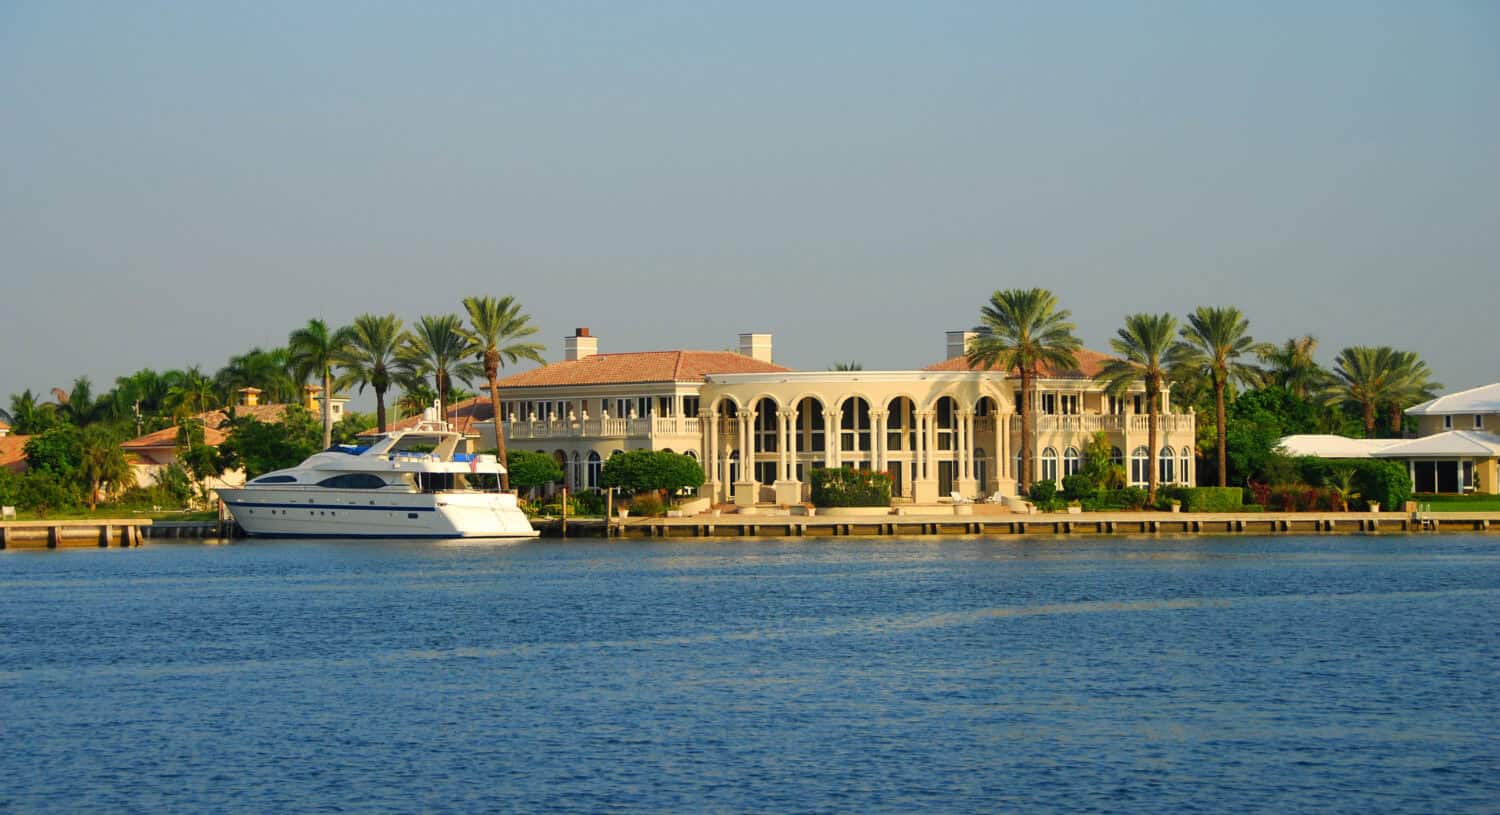 Luxury mansion and boat